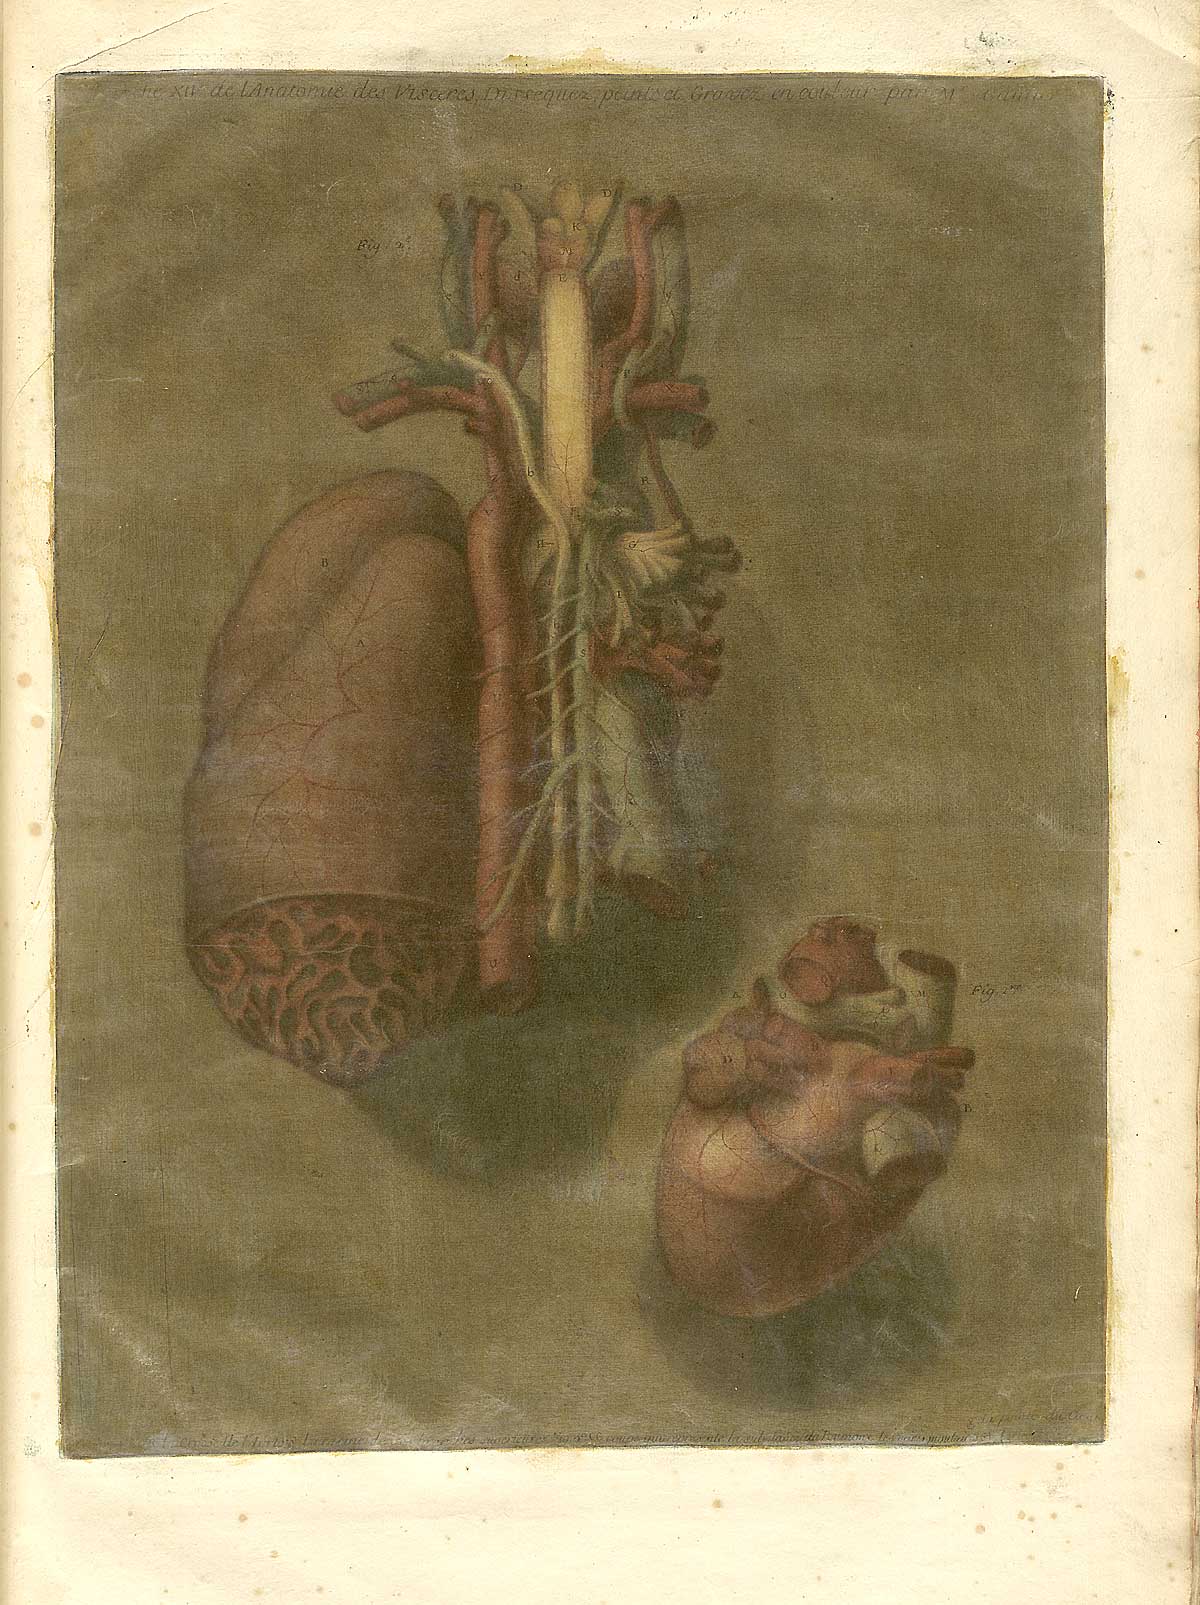 Color mezzotint of two views of the heart: the largest, in the center of the page is a view from the rear with part of the underside dissected; to the right at top is a smaller view of the heart from above; from Jacques Fabian Gautier d’Agoty’s Anatomie générale des viscères en situation, NLM Call no.: WZ 260 G283c 1745.